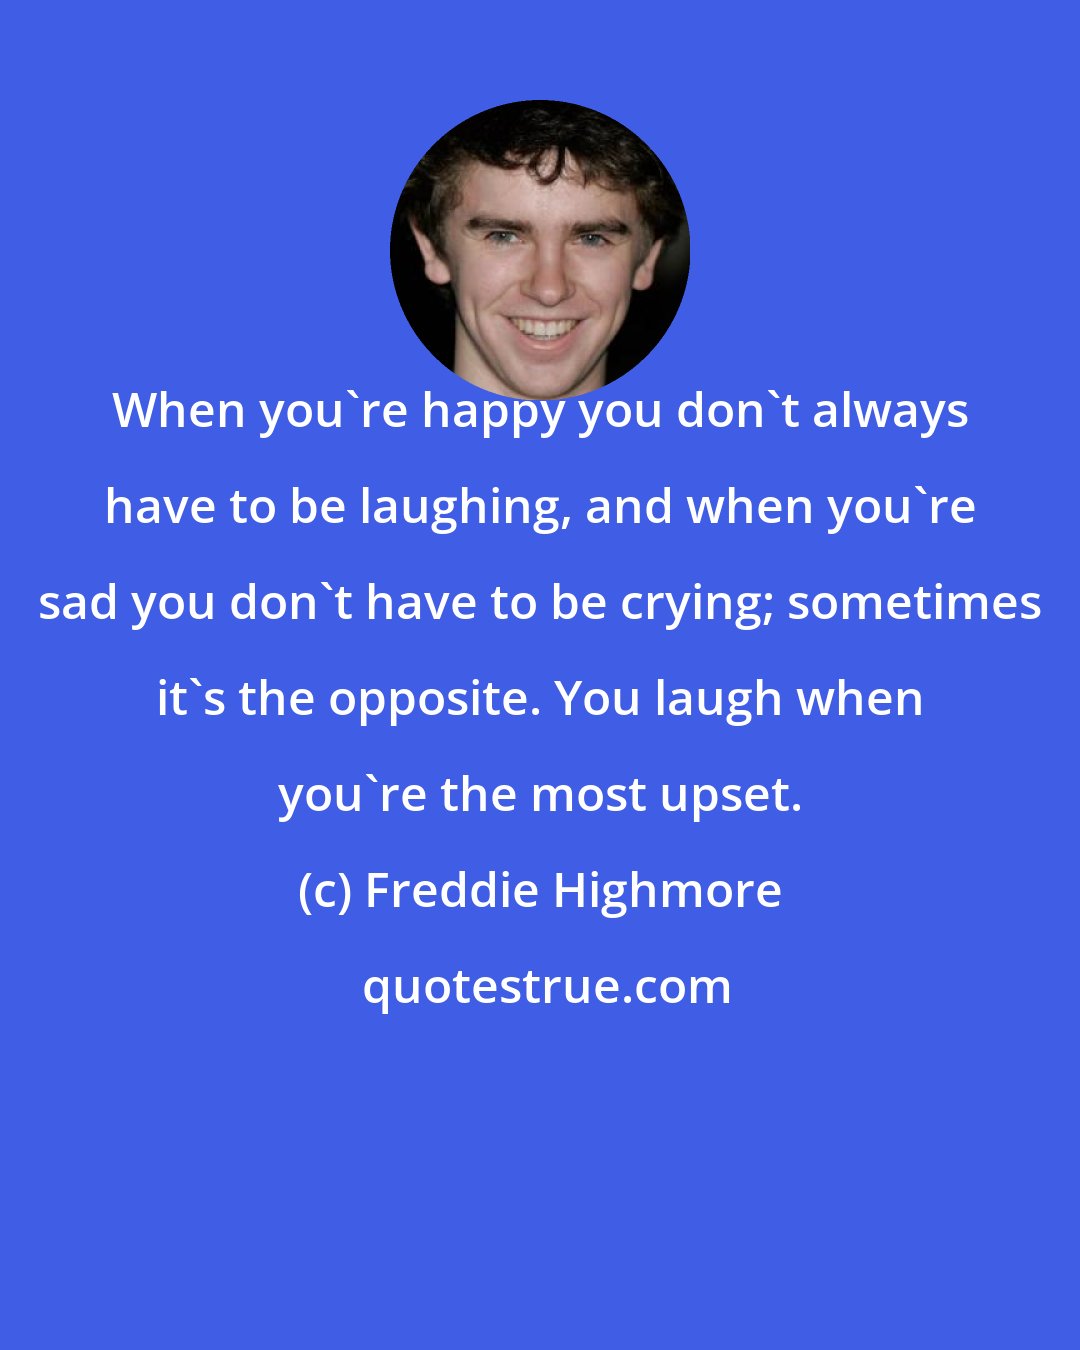 Freddie Highmore: When you're happy you don't always have to be laughing, and when you're sad you don't have to be crying; sometimes it's the opposite. You laugh when you're the most upset.